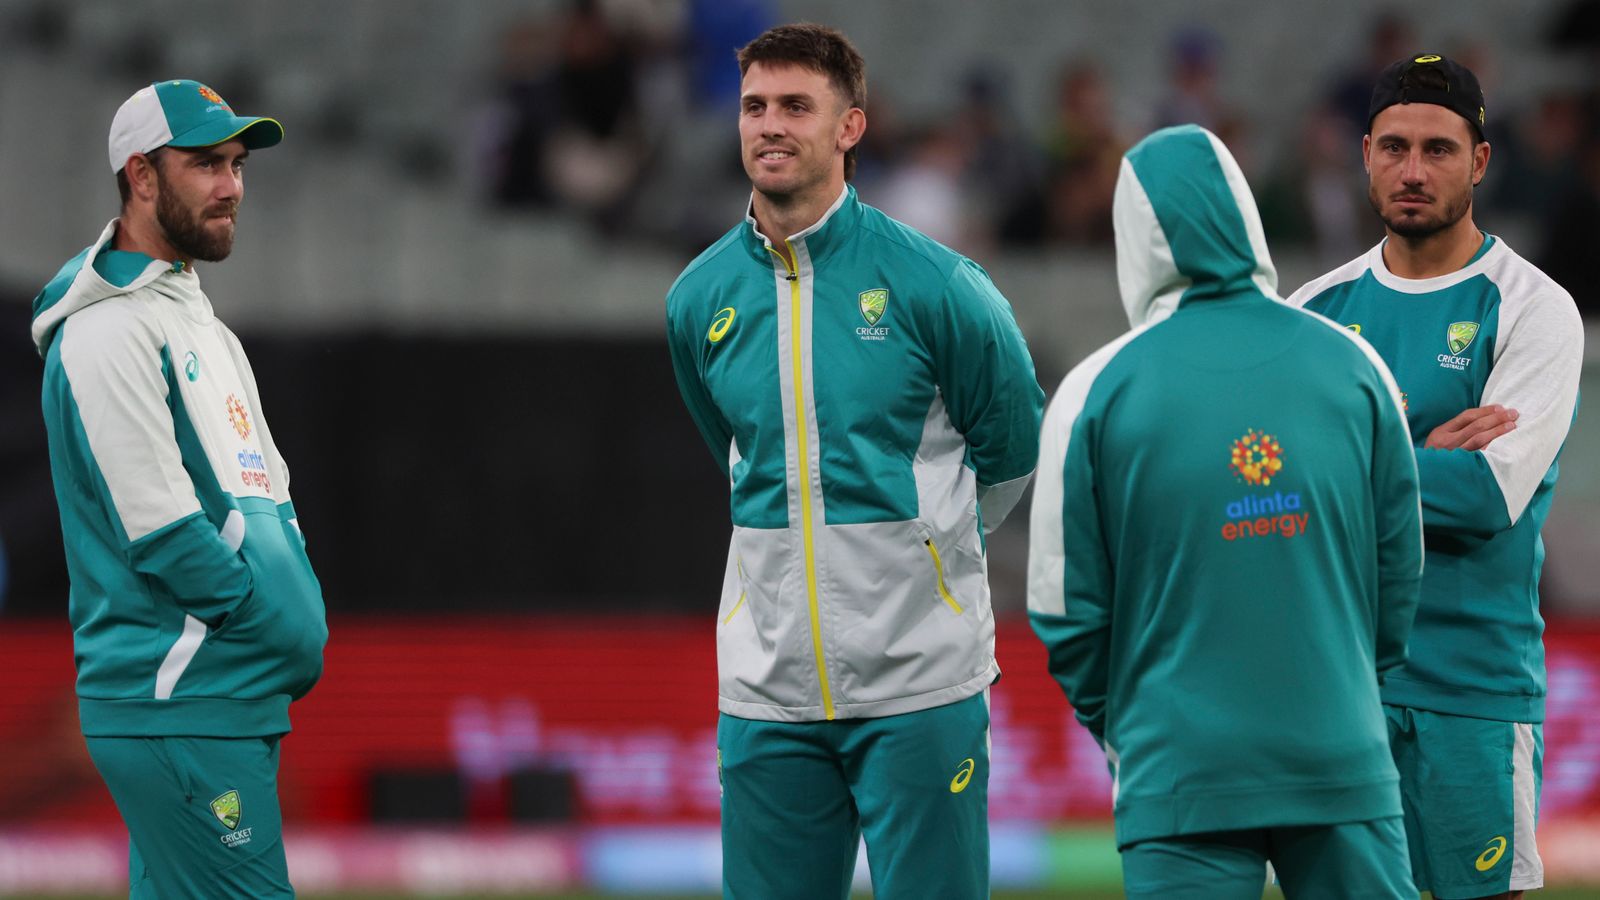 T20 World Cup: England’s clash with Australia abandoned in Melbourne to leave Group 1 wide open